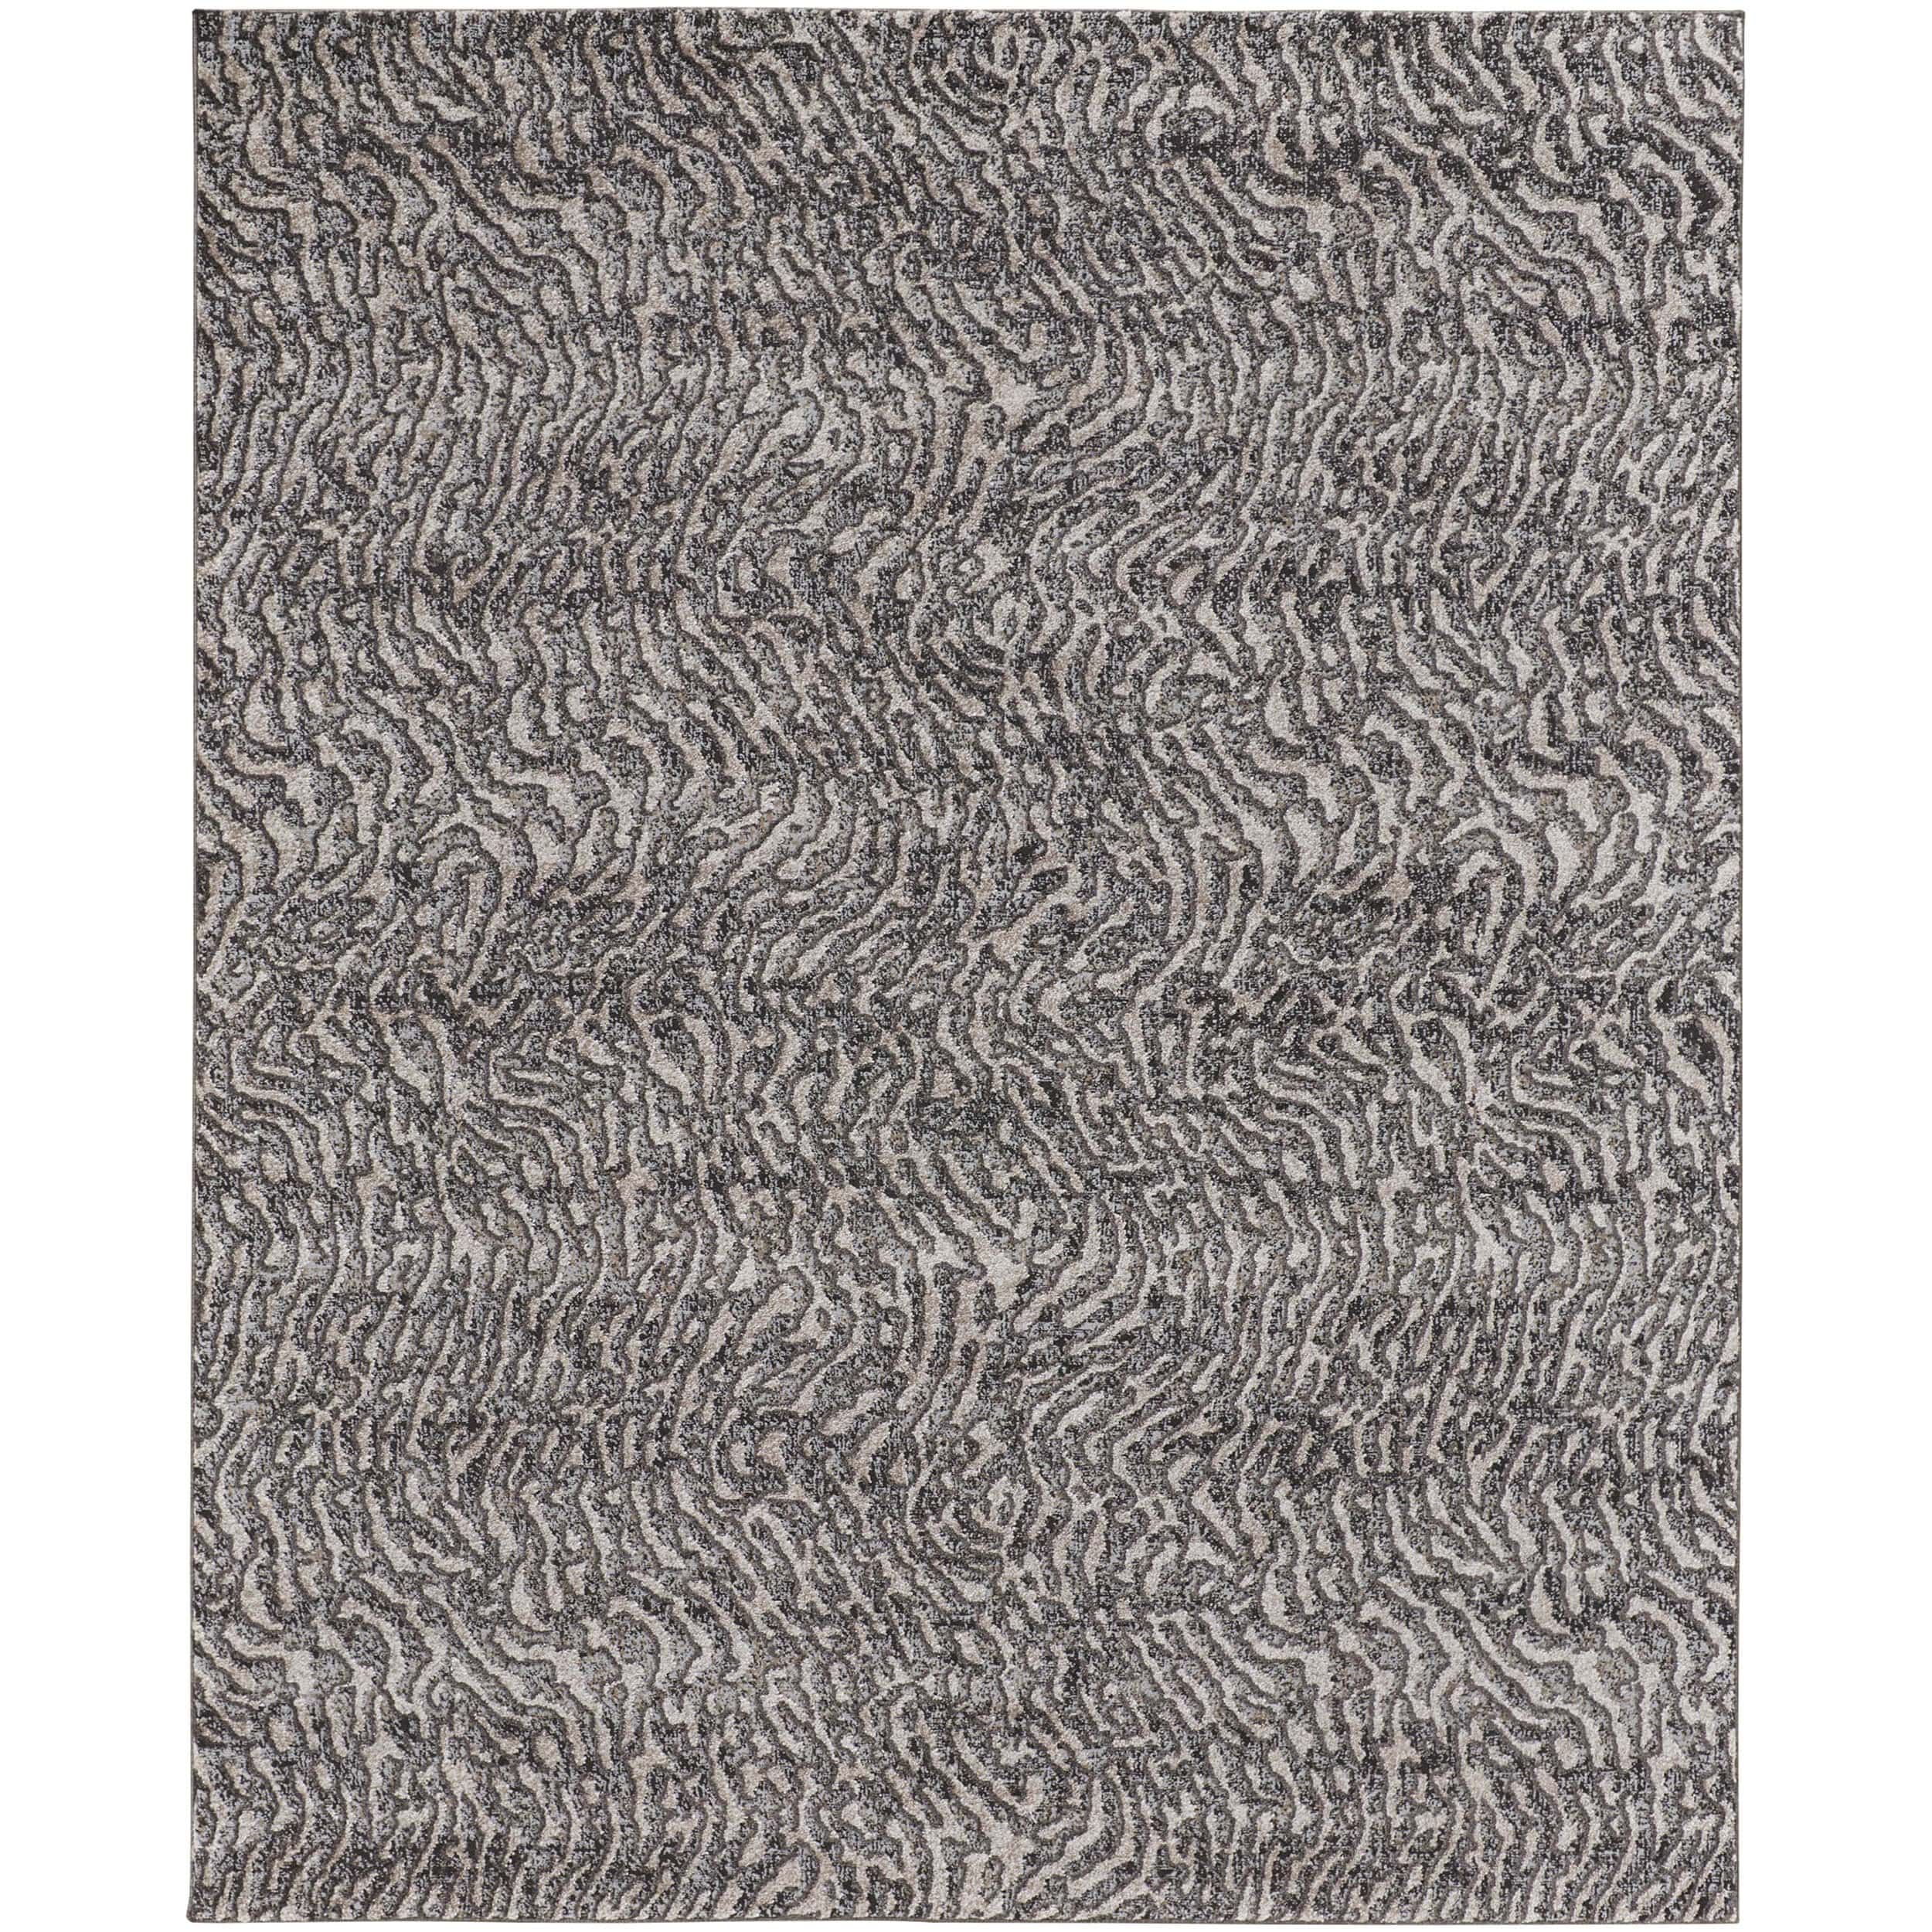 Image of Feizy Rug Vancouver 39FJF, Beige/Charcoal